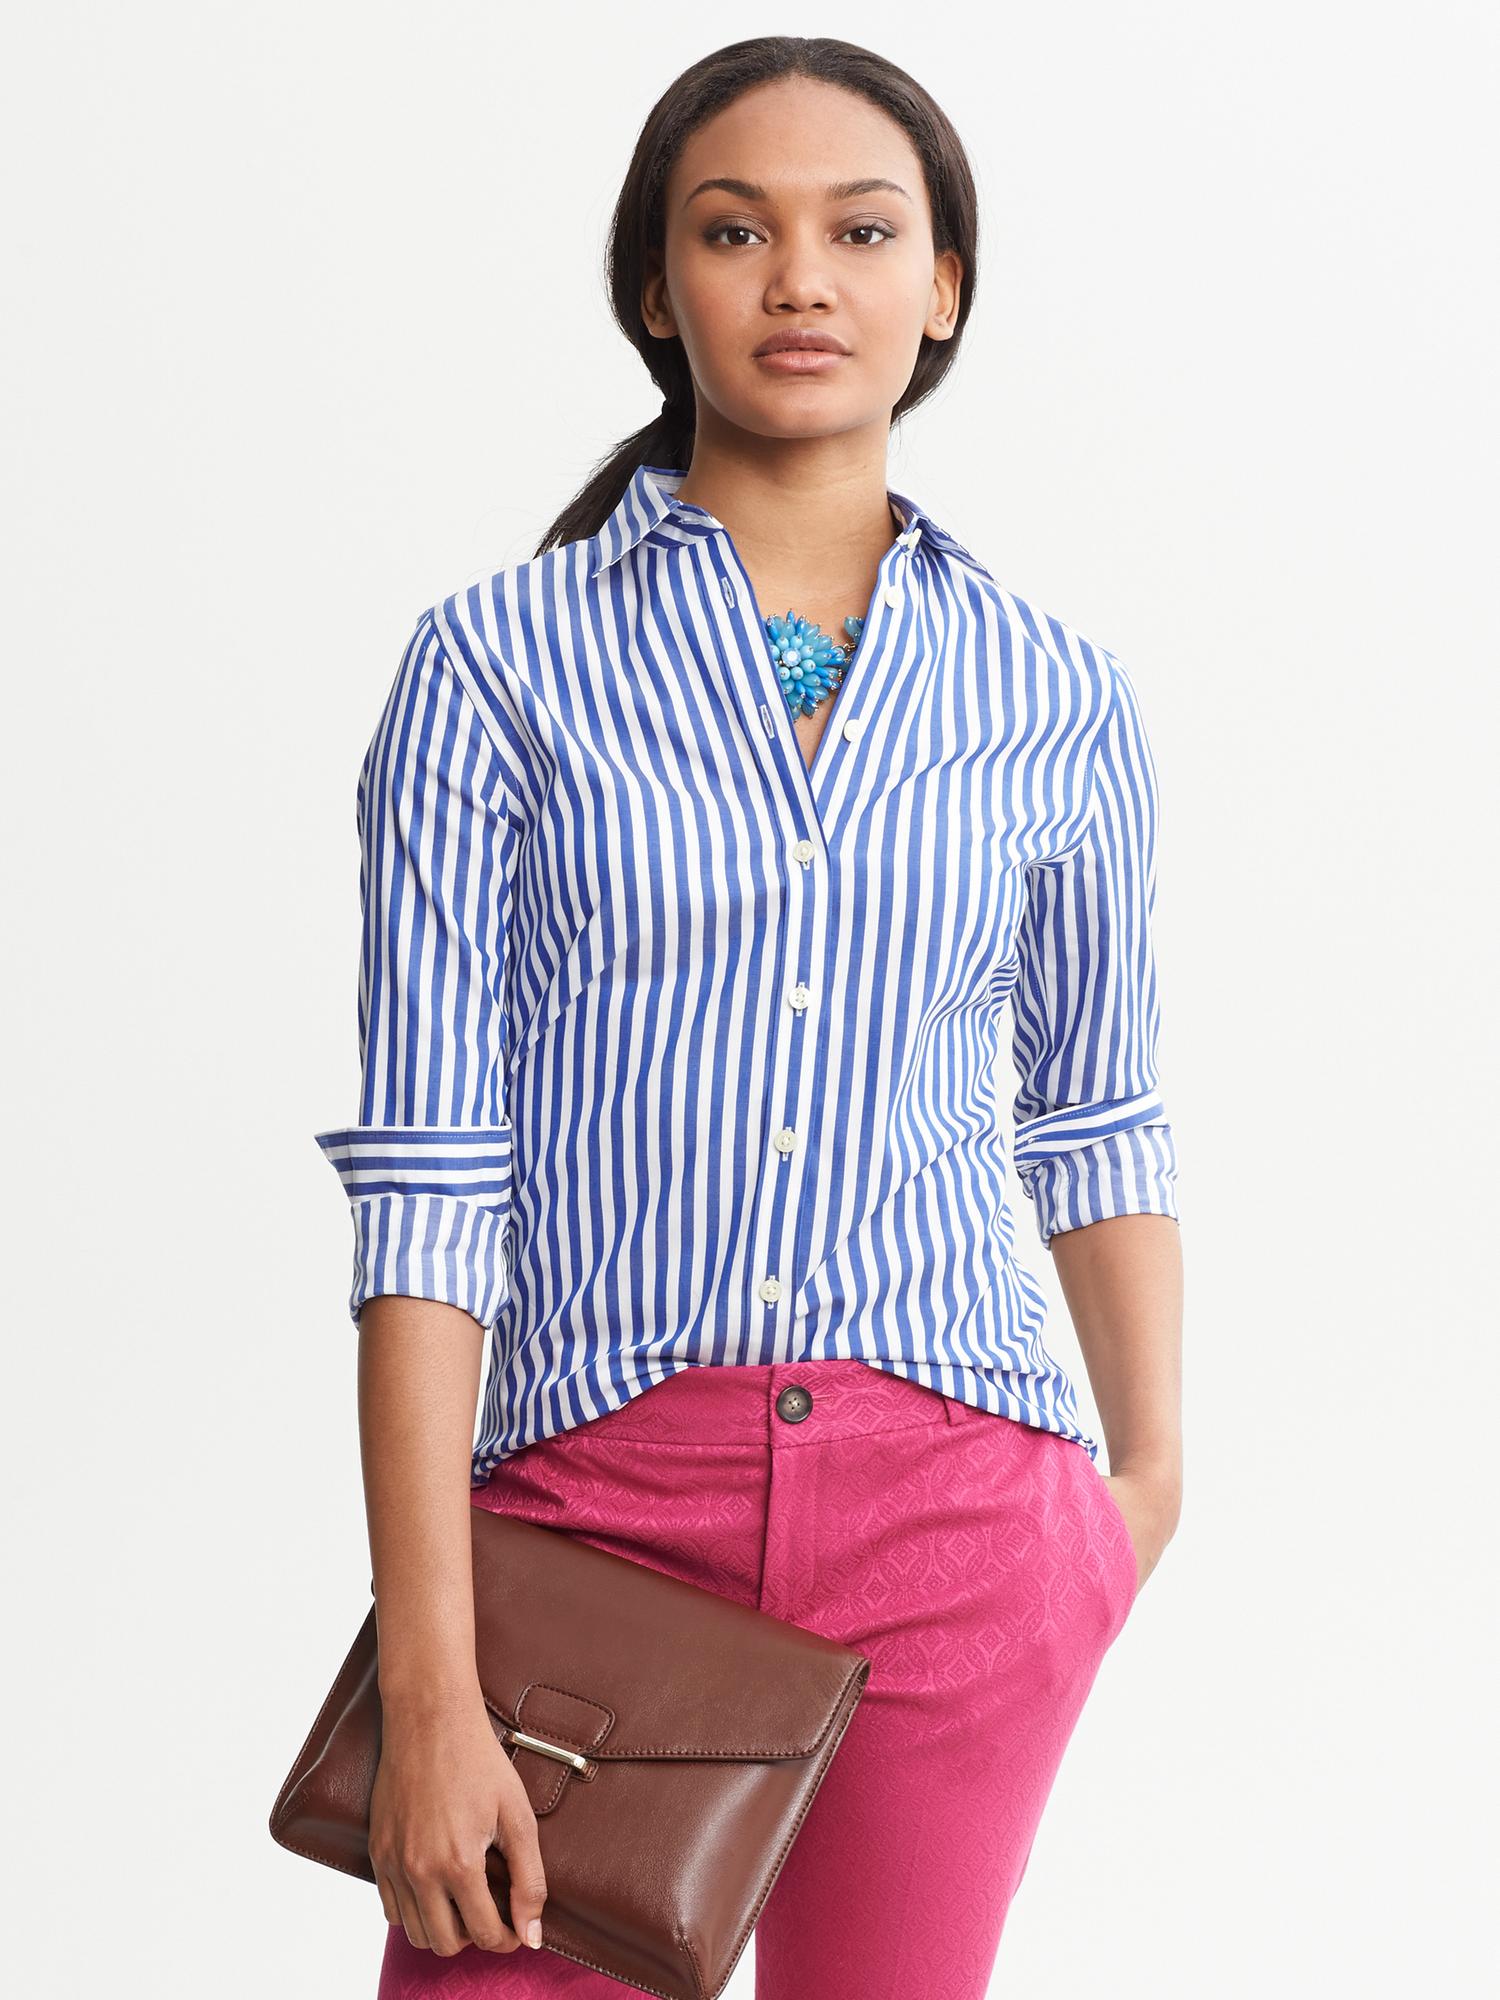 Fitted Non-Iron Blue Striped Shirt